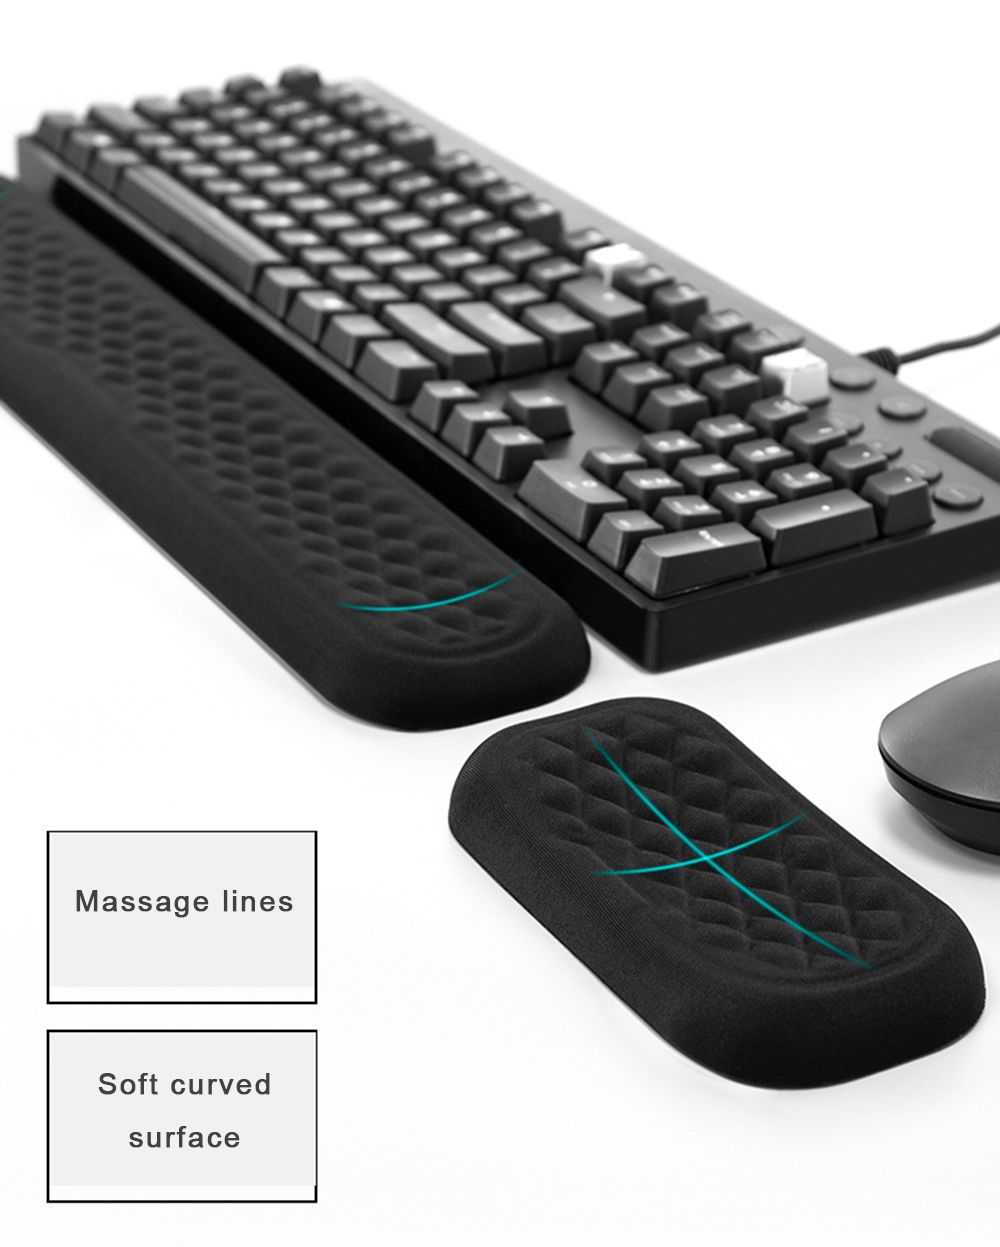 Vaydeer-STA03-Keyboard-Holder-Mouse-Pad-Wrist-Memory-Cotton-Mechanical-Office-Computer-Hand-Protecti-1727261